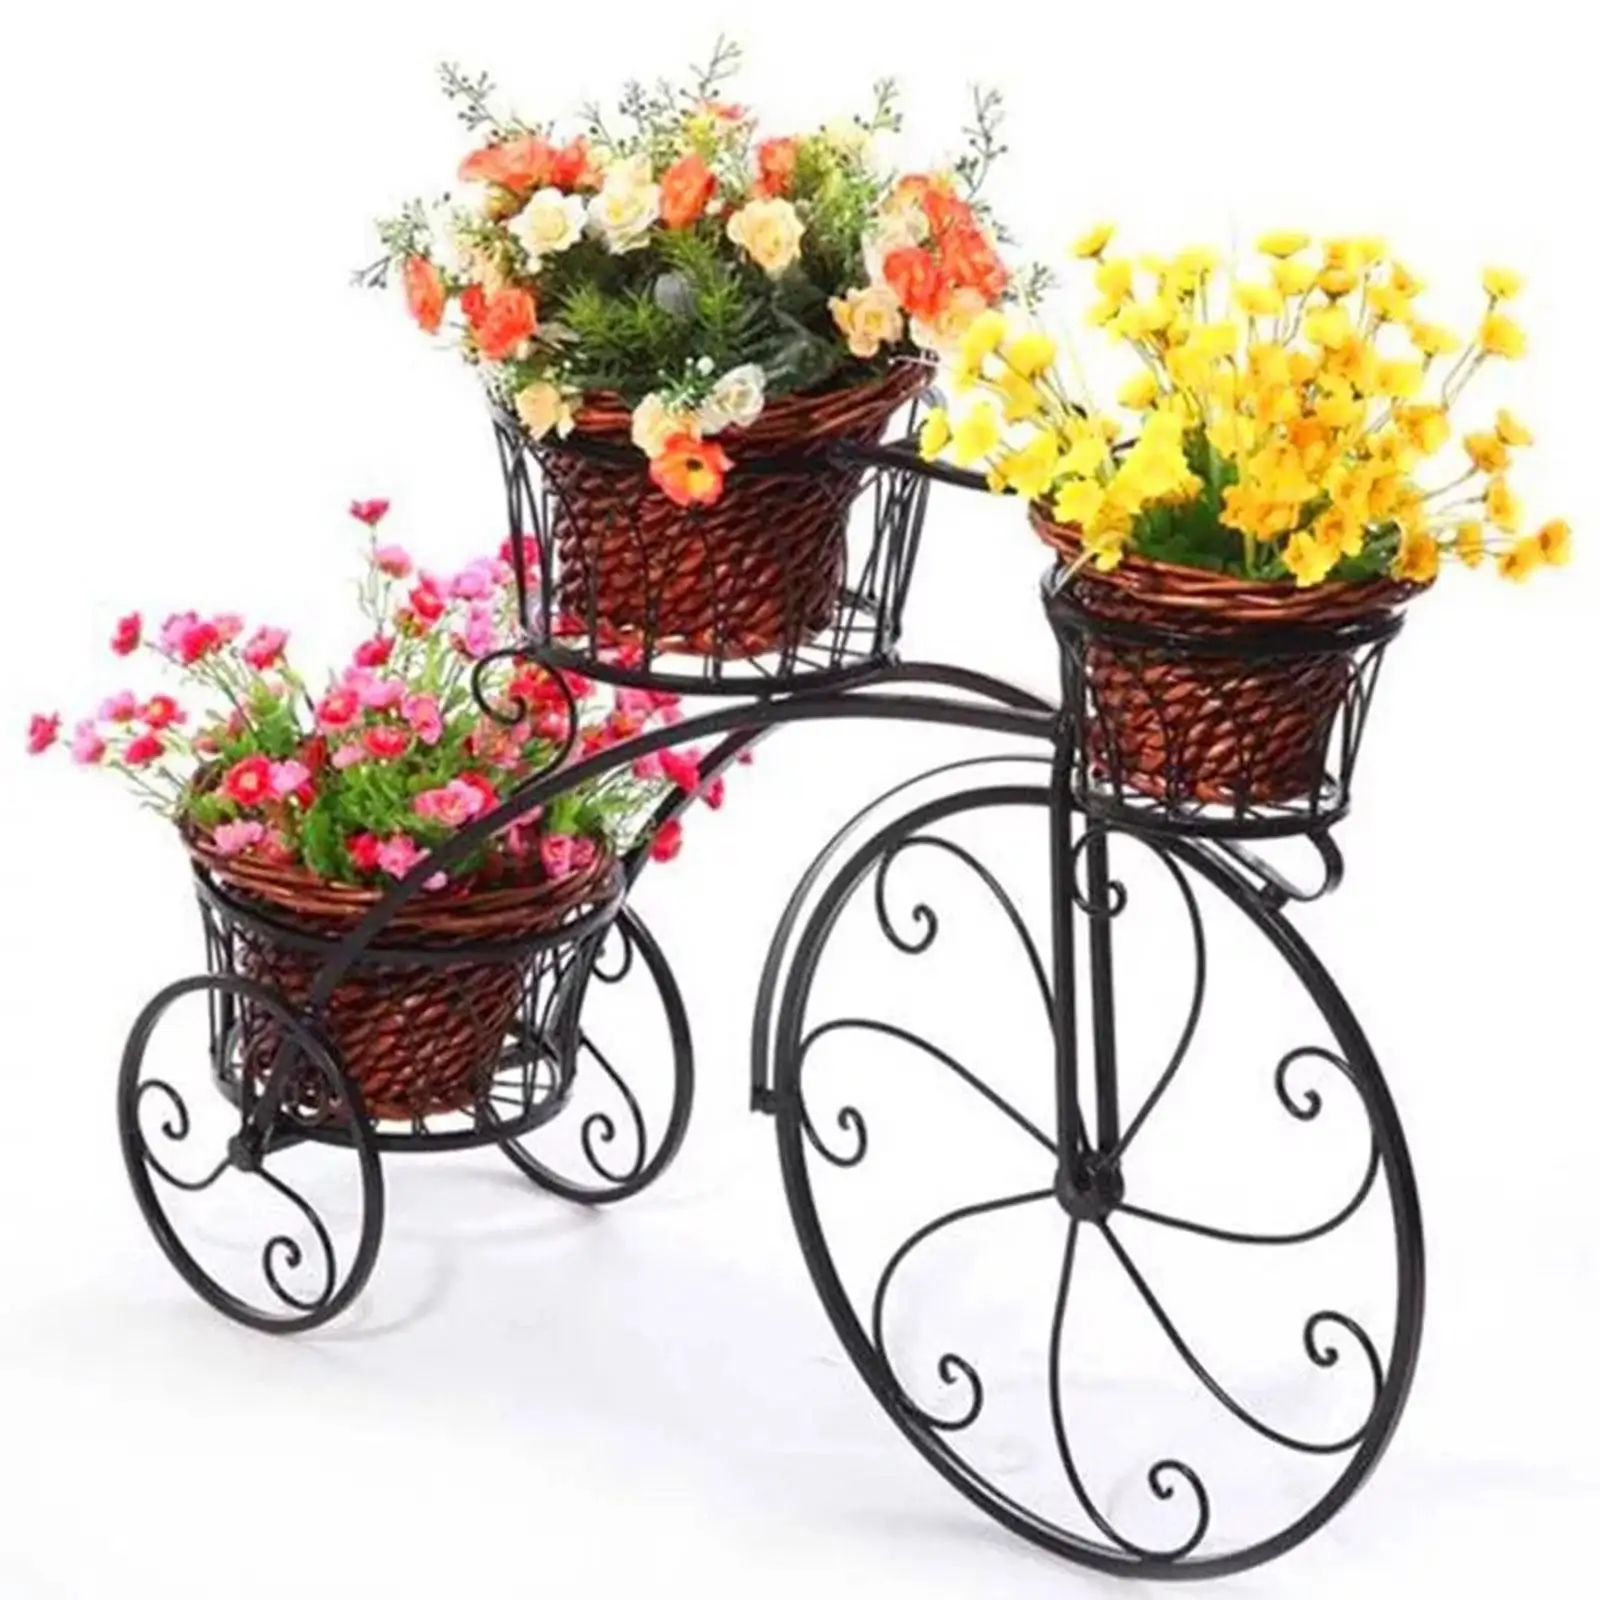 European Style Bicycle Flower Basket Display Rack Cart Holder Art Ornaments Metal Bicycle Plant Stand for Patio Decoration Home